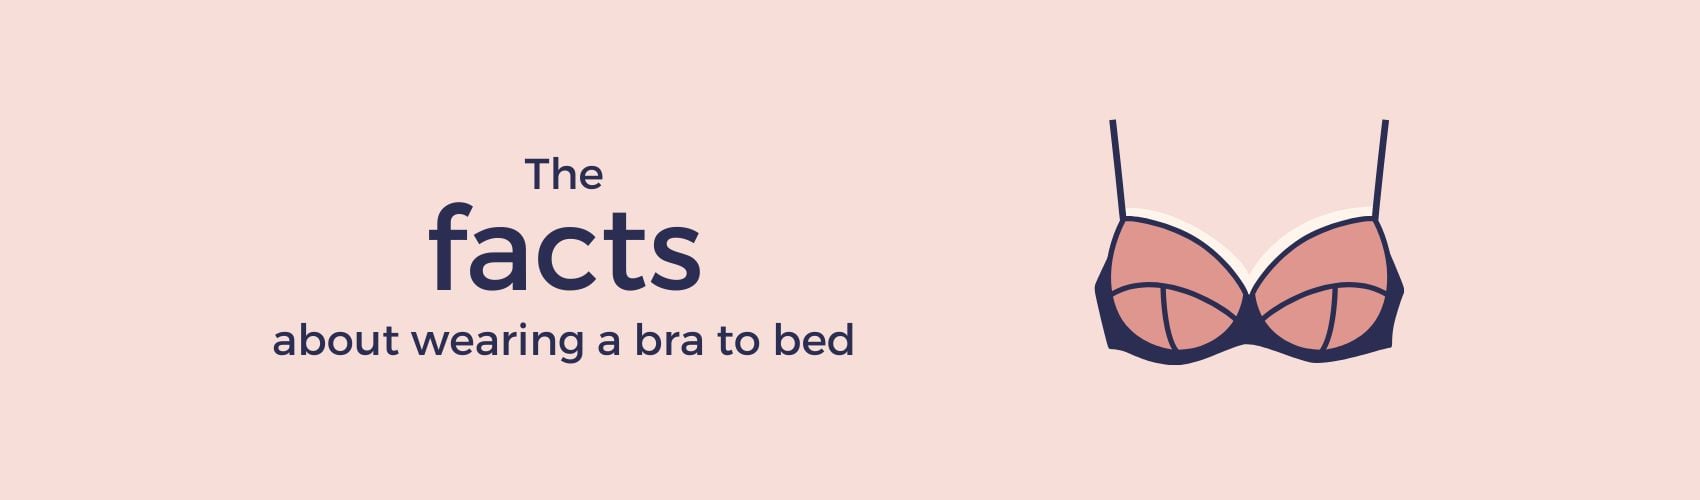 Pee Safe on Instagram: Sometimes the best support is no support at all ✨  Other than being FREE, here are some reasons why sleeping without a bra is  important: 1. Sleeping naked